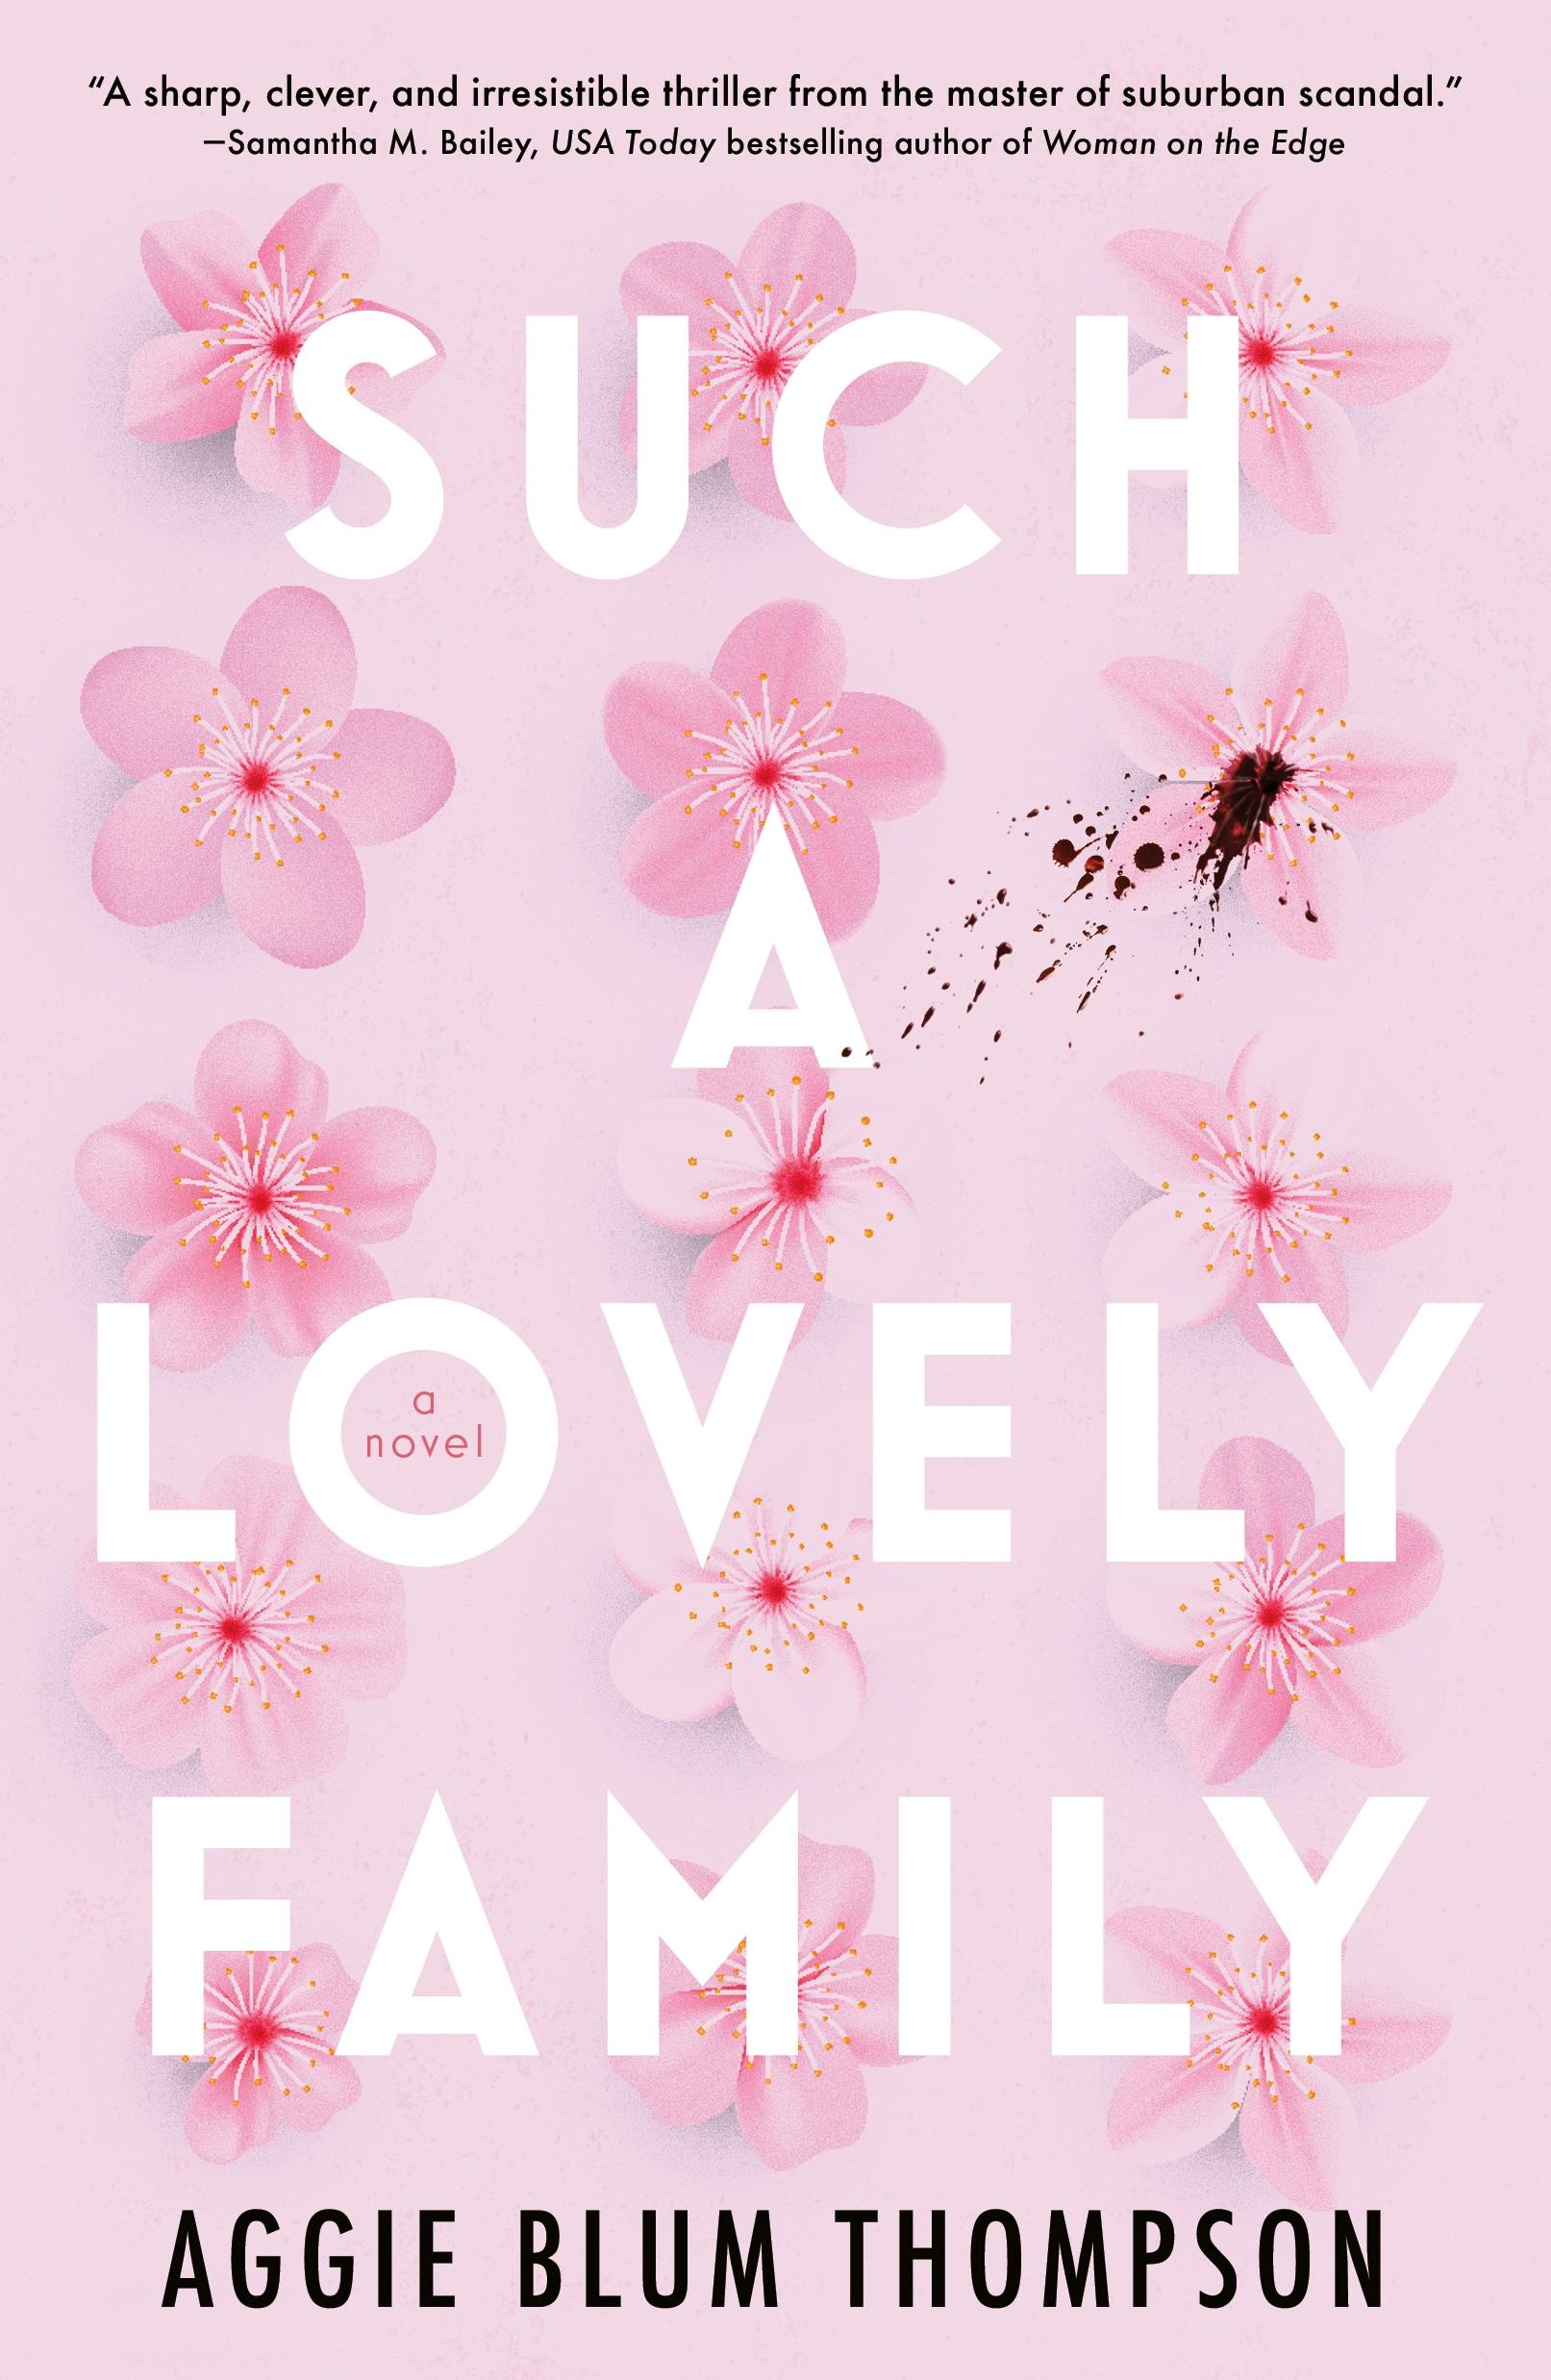 Cover for the book titled as: Such a Lovely Family